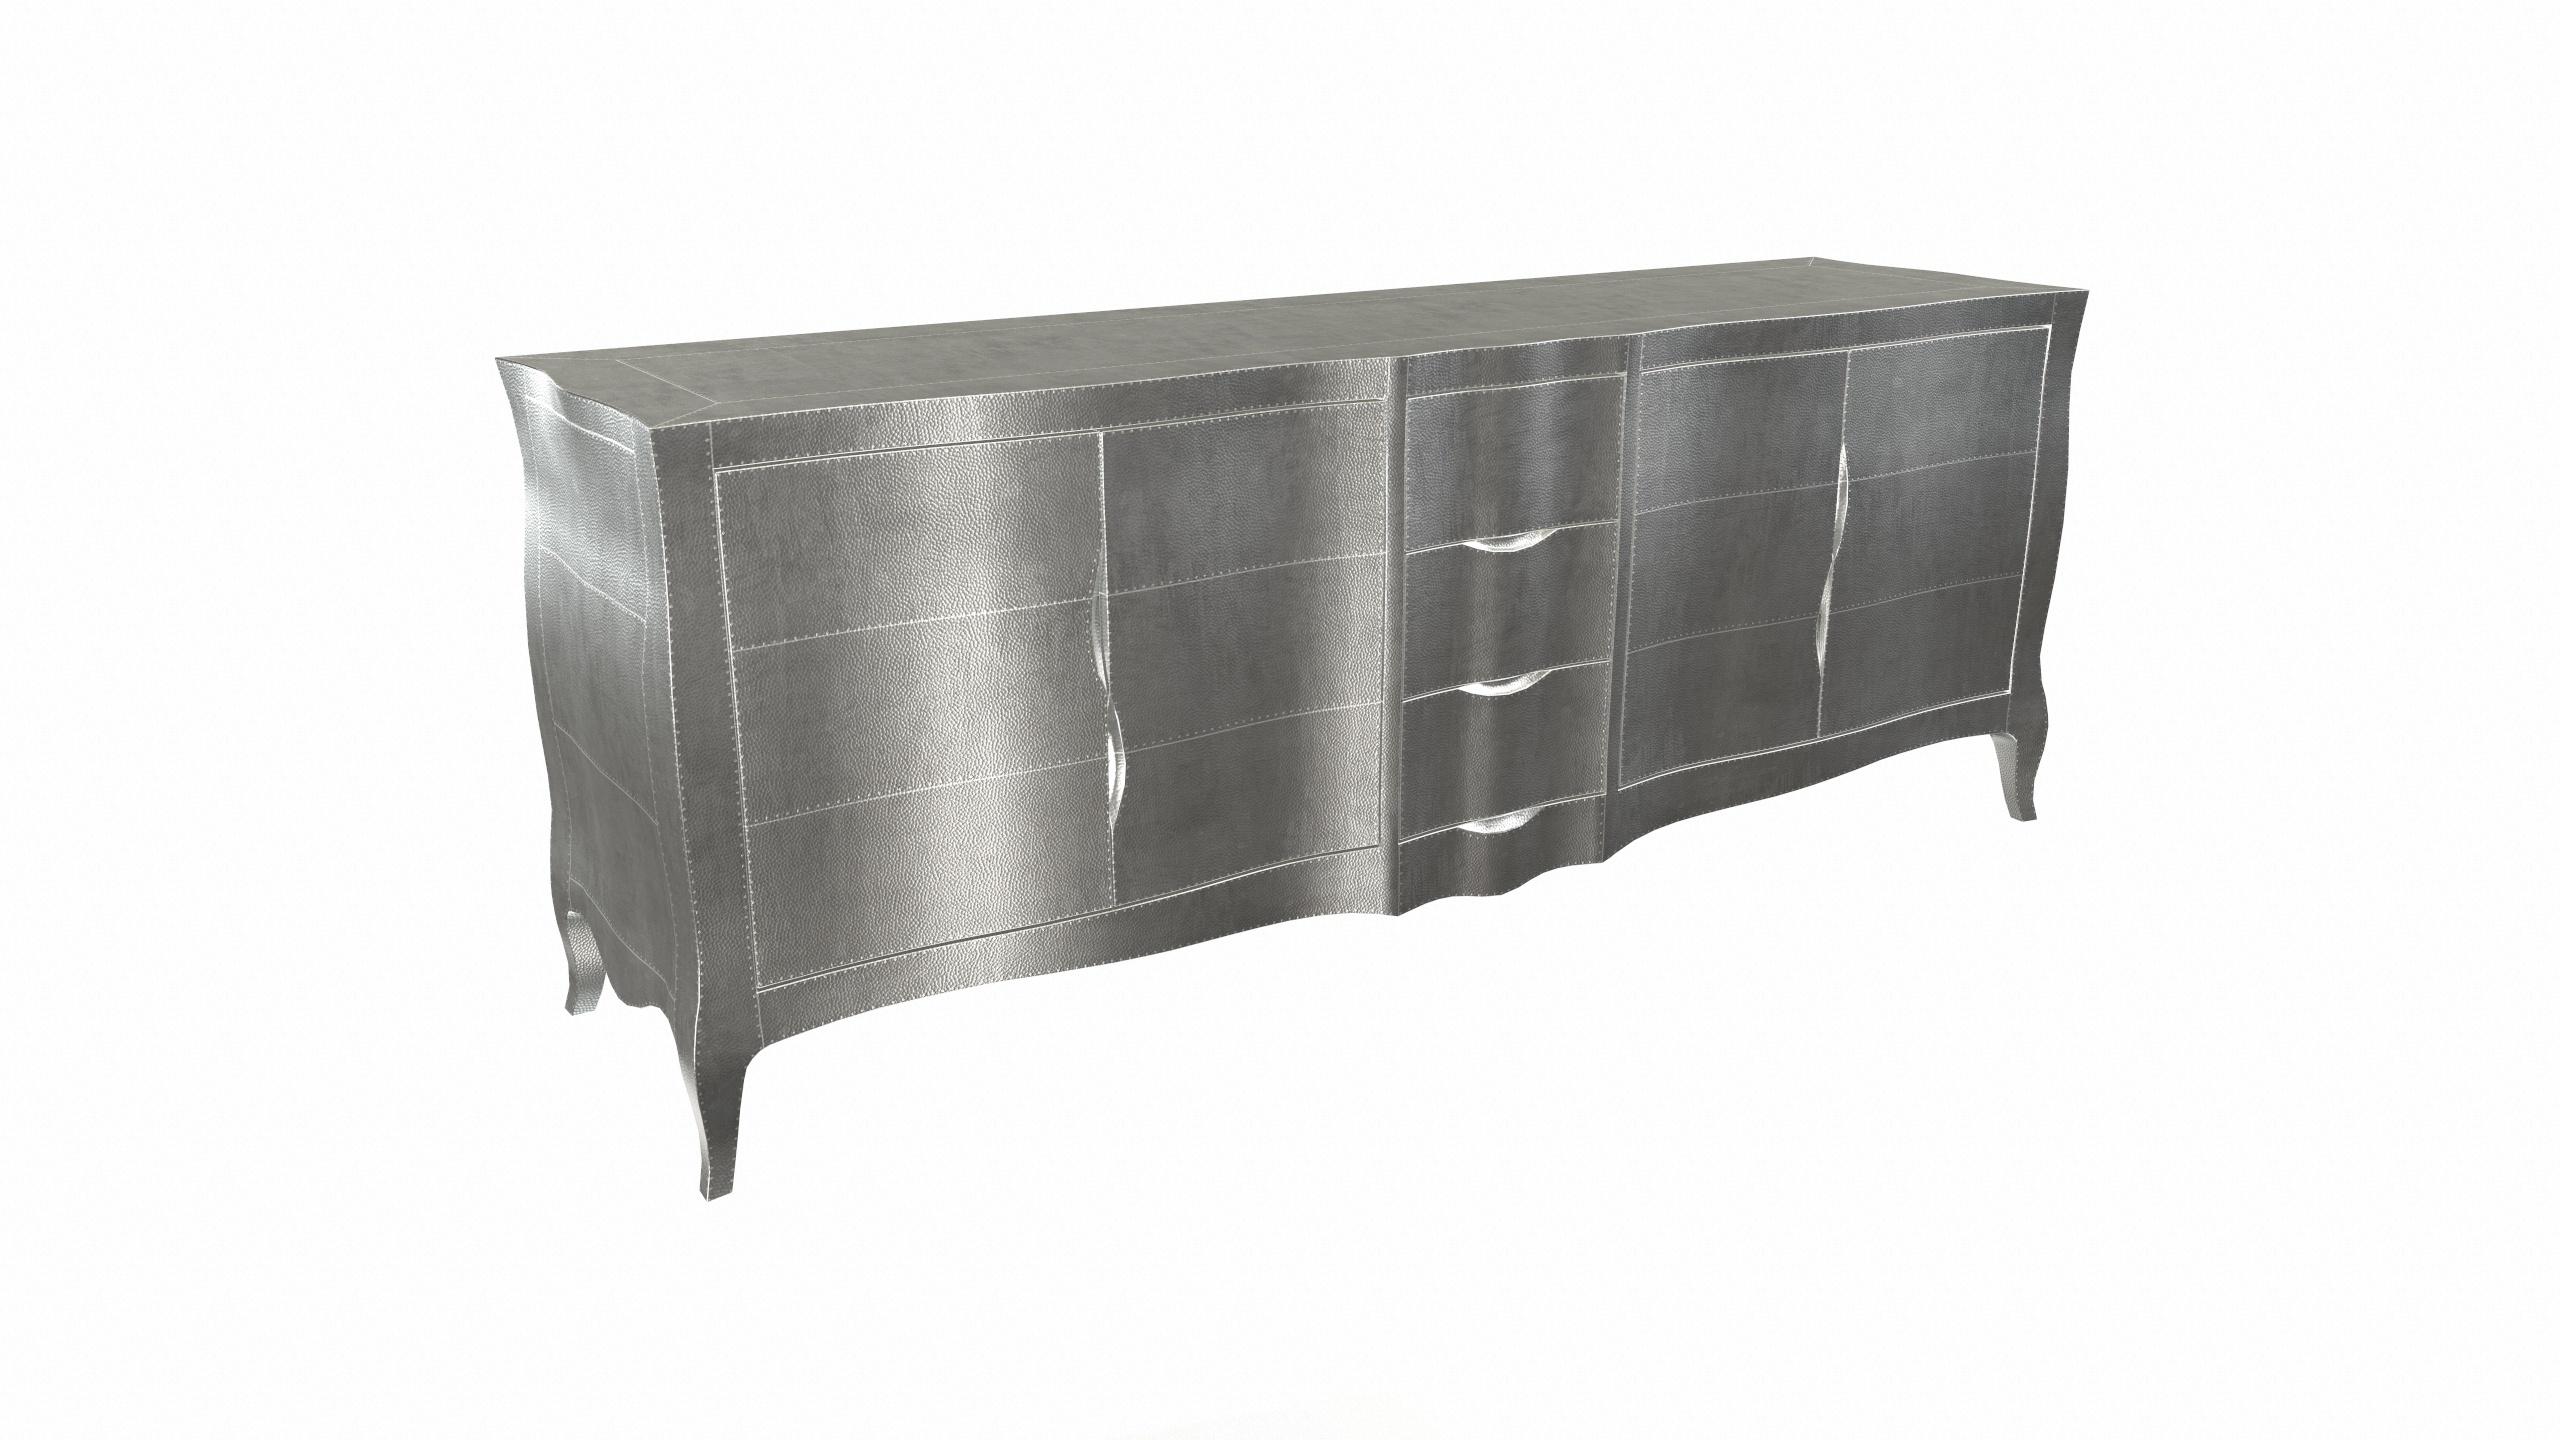 Contemporary Louise Credenza Art Deco Cabinets in Mid. Hammered White Bronze by Paul Mathieu For Sale